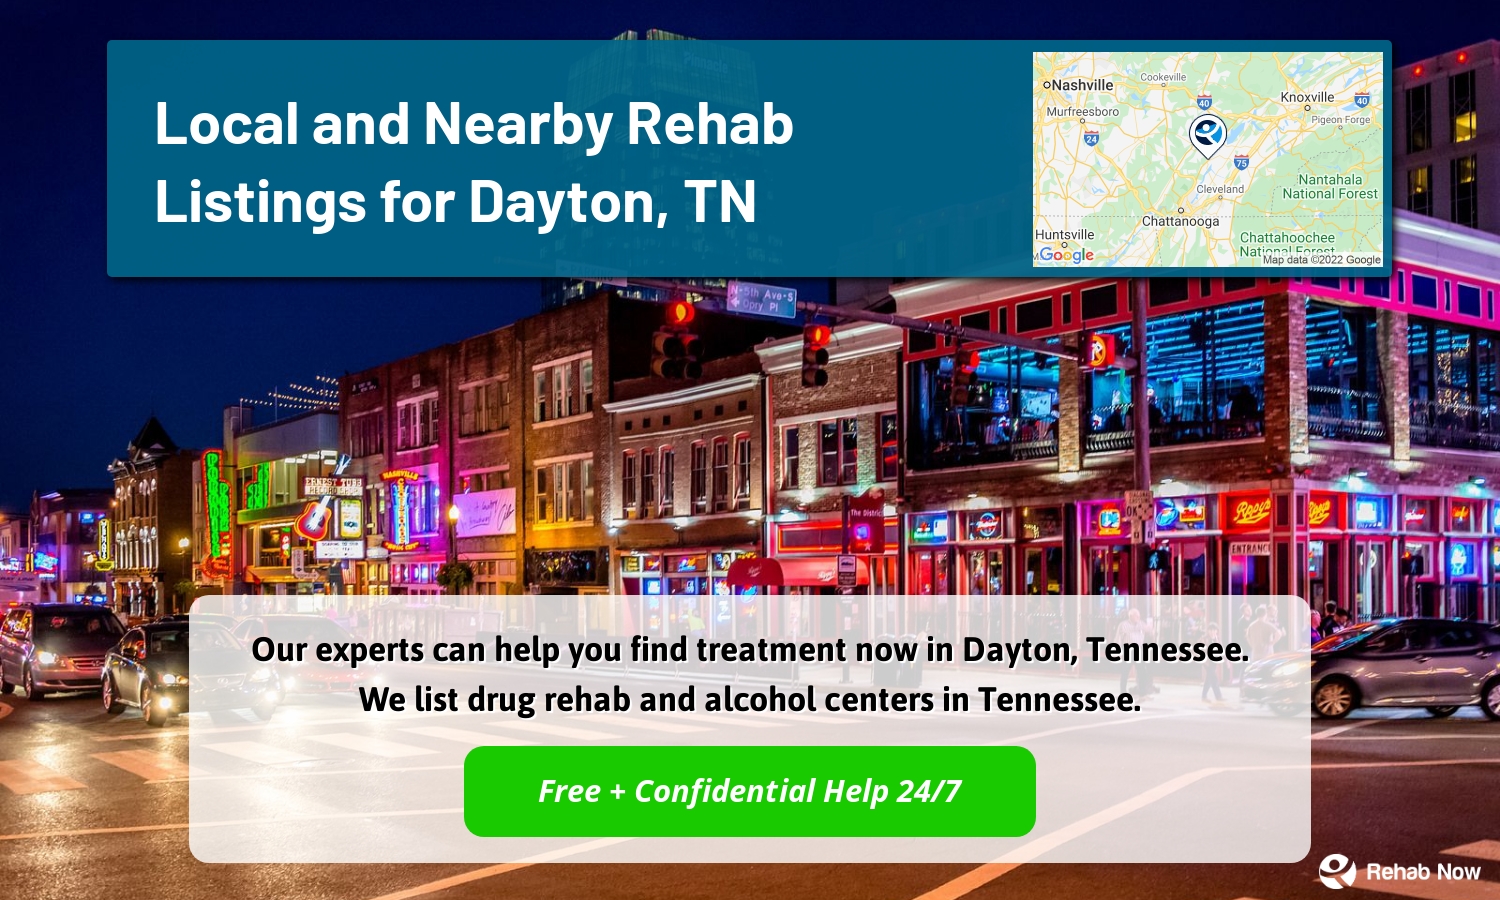 Our experts can help you find treatment now in Dayton, Tennessee. We list drug rehab and alcohol centers in Tennessee.